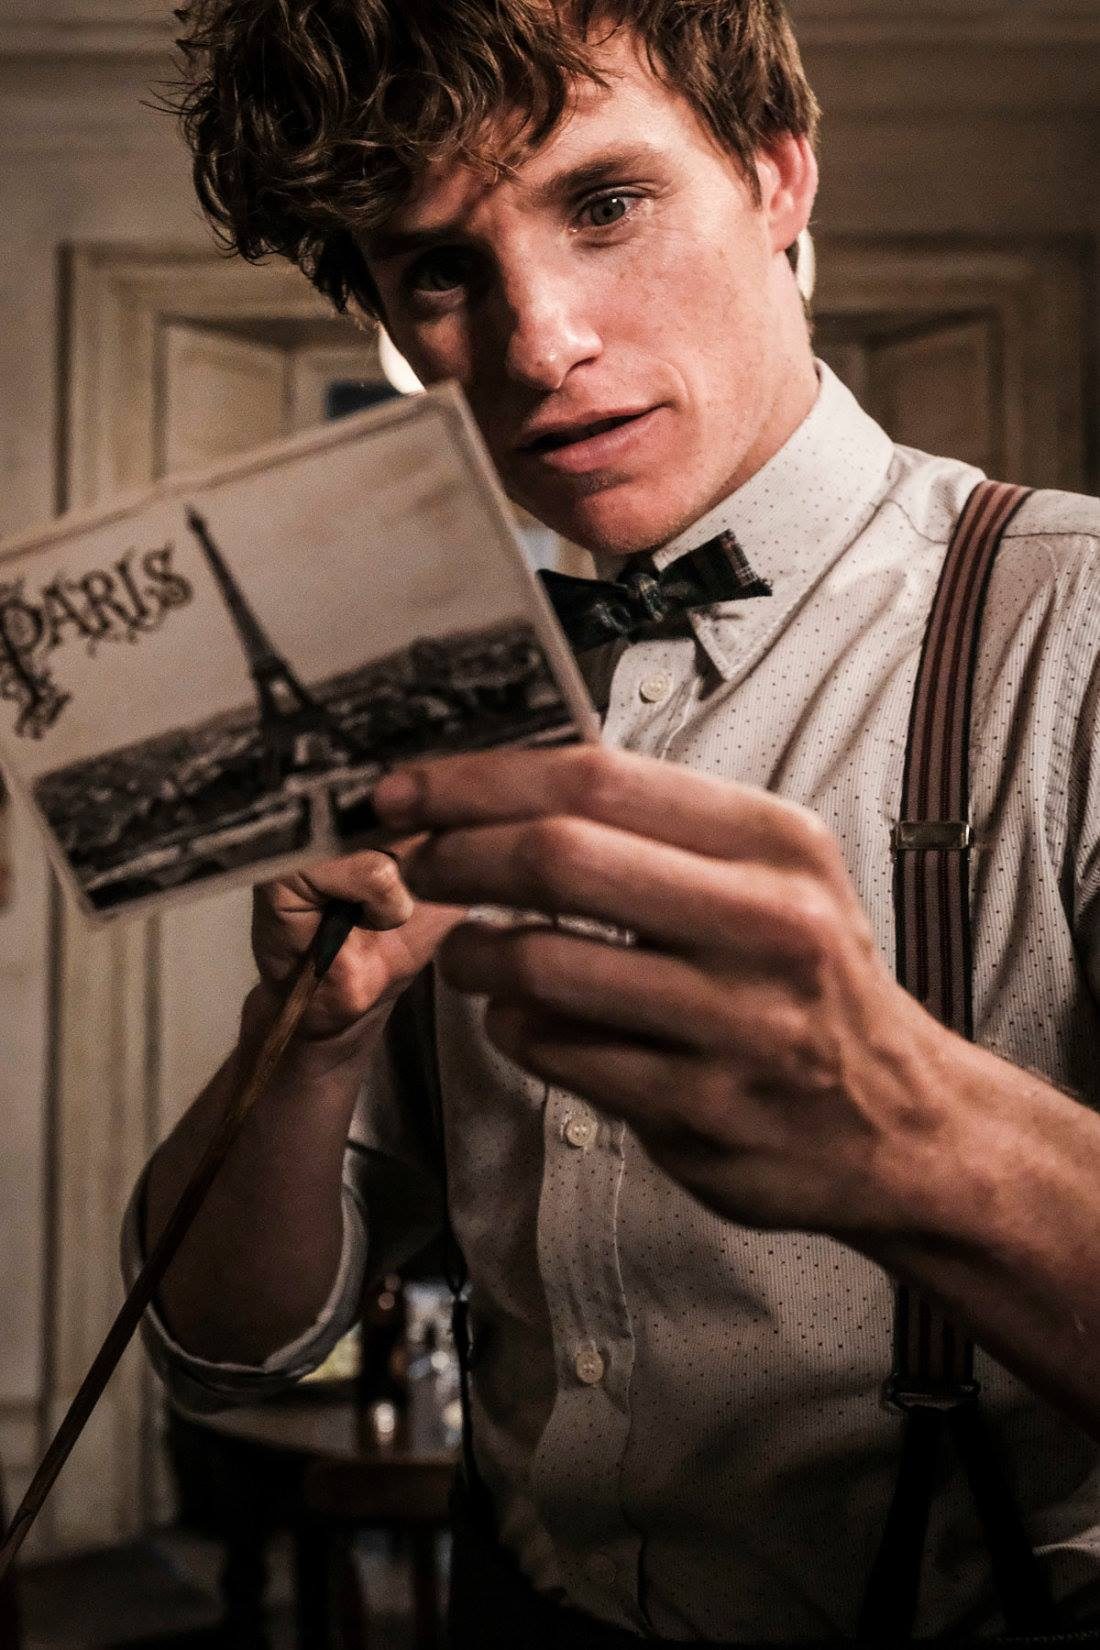 NEW ADVENTURE. Newt Scamander holds an intriguing postcard from Paris. Photo from Facebook.com/pottermore 